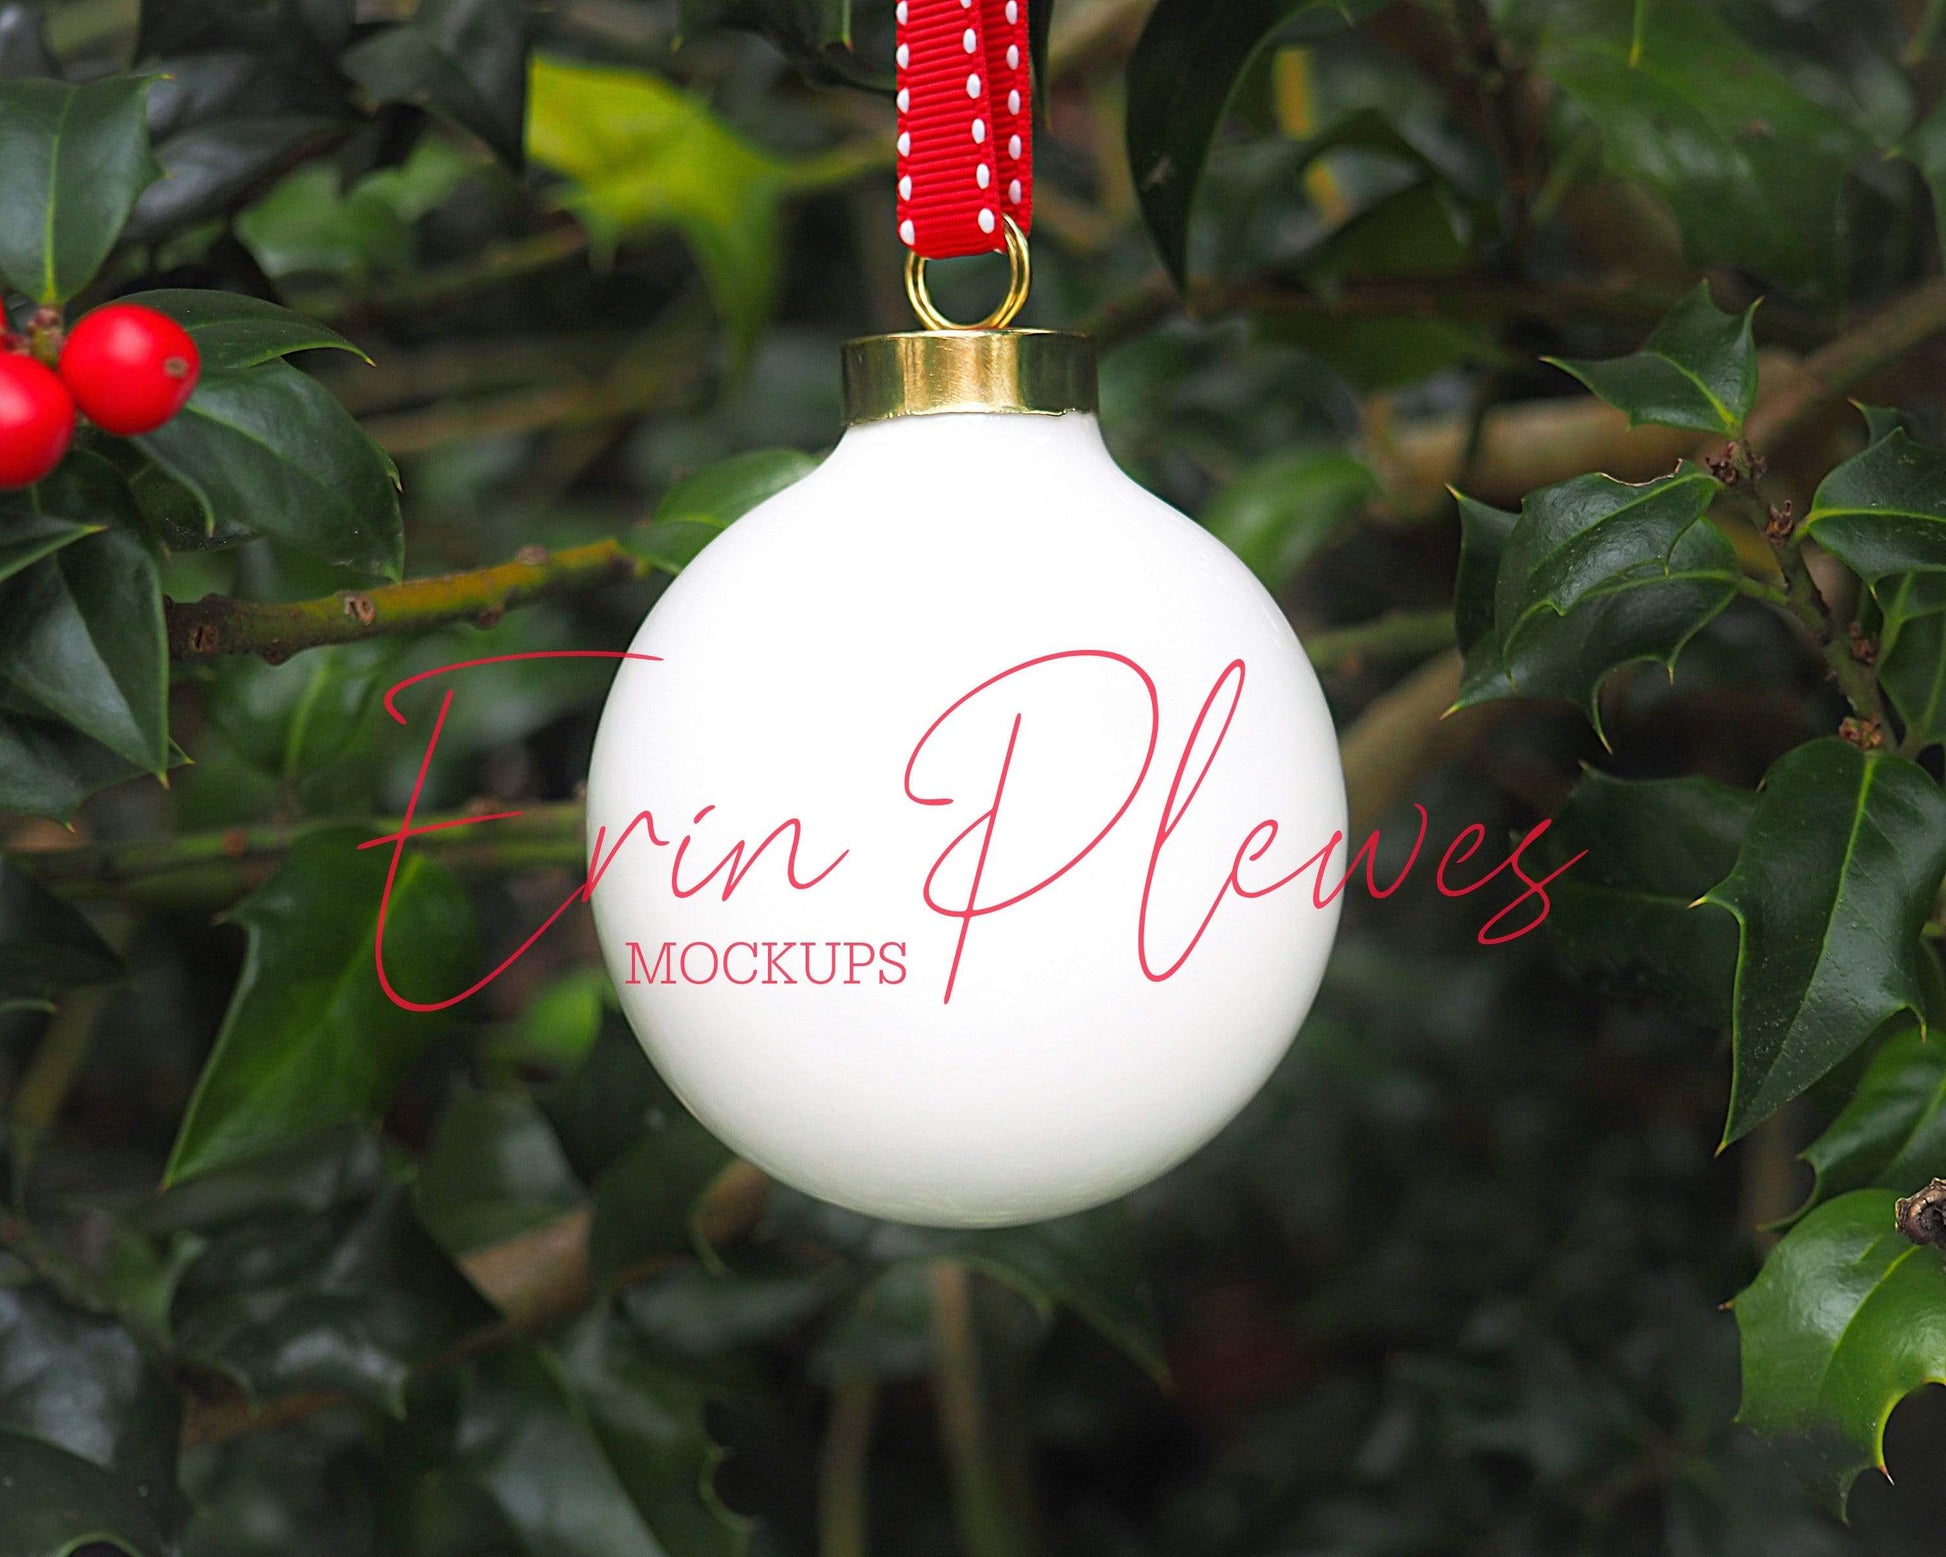 Erin Plewes Mockups Blank Christmas ornament mockup, white ball Xmas decor mock up to add your design template for lifestyle photography, JPG Digital Download